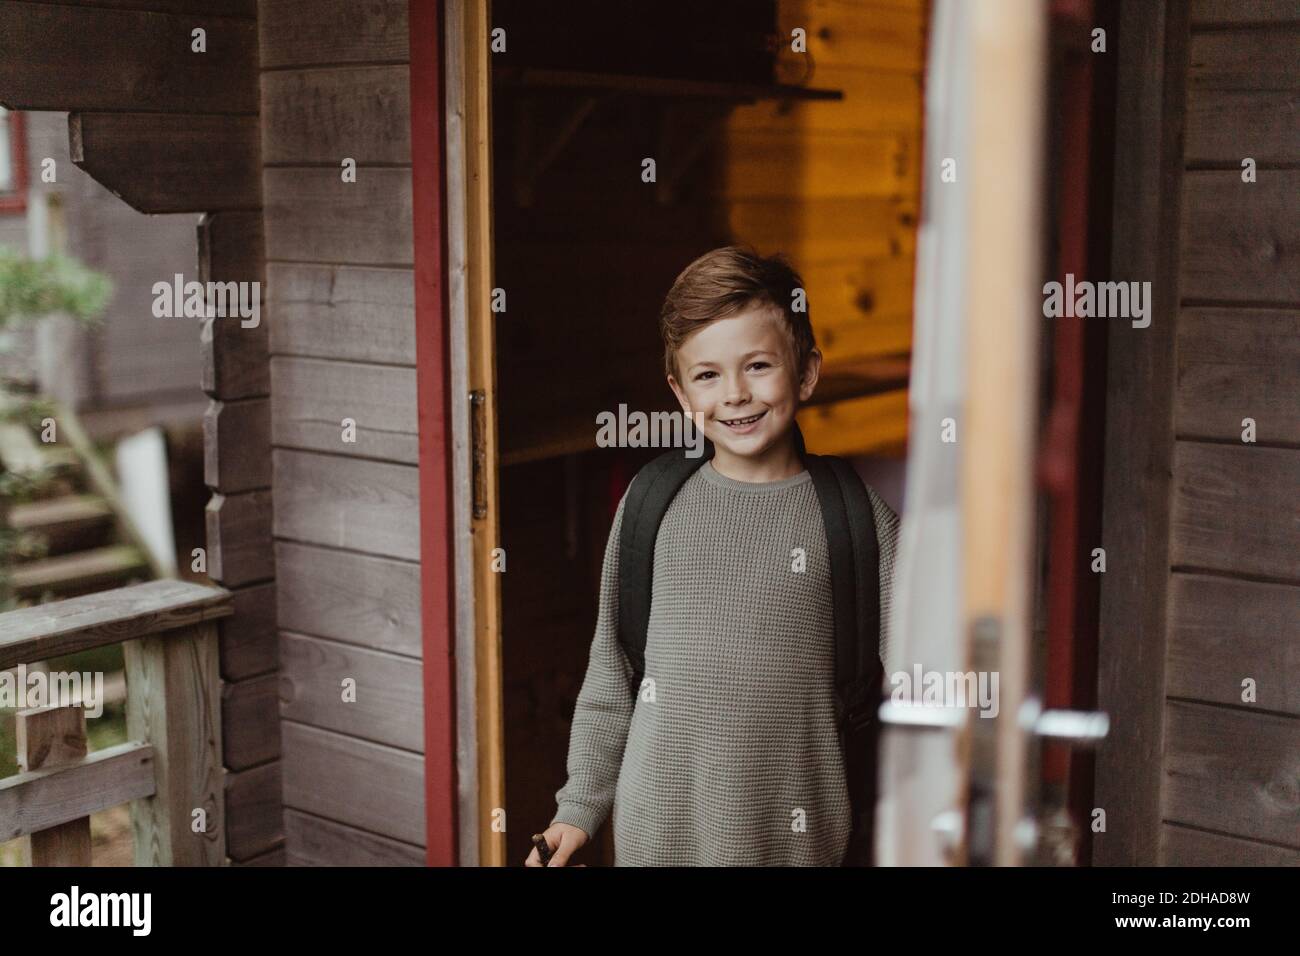 Portrait of smiling boy standing at doorway of house during vacation Stock Photo